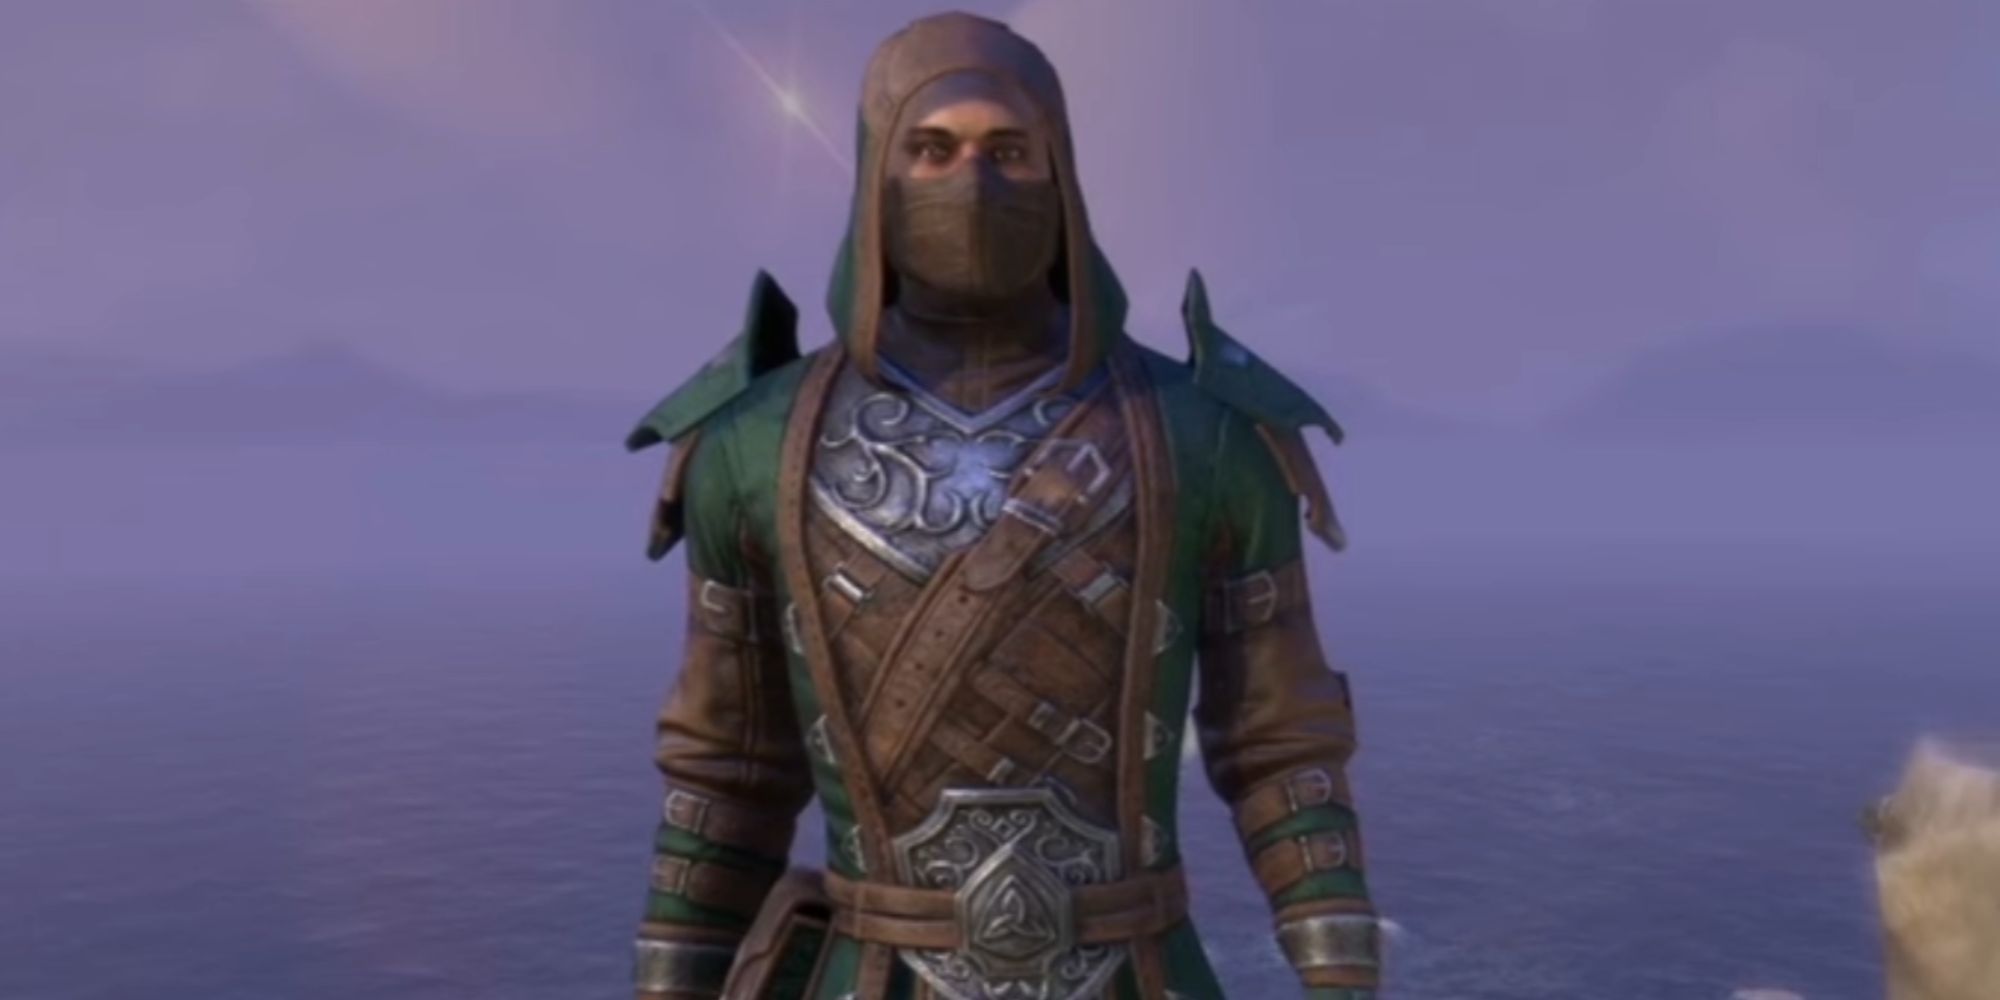 ESO Character Wearing The Ancestral Breton Light Armor